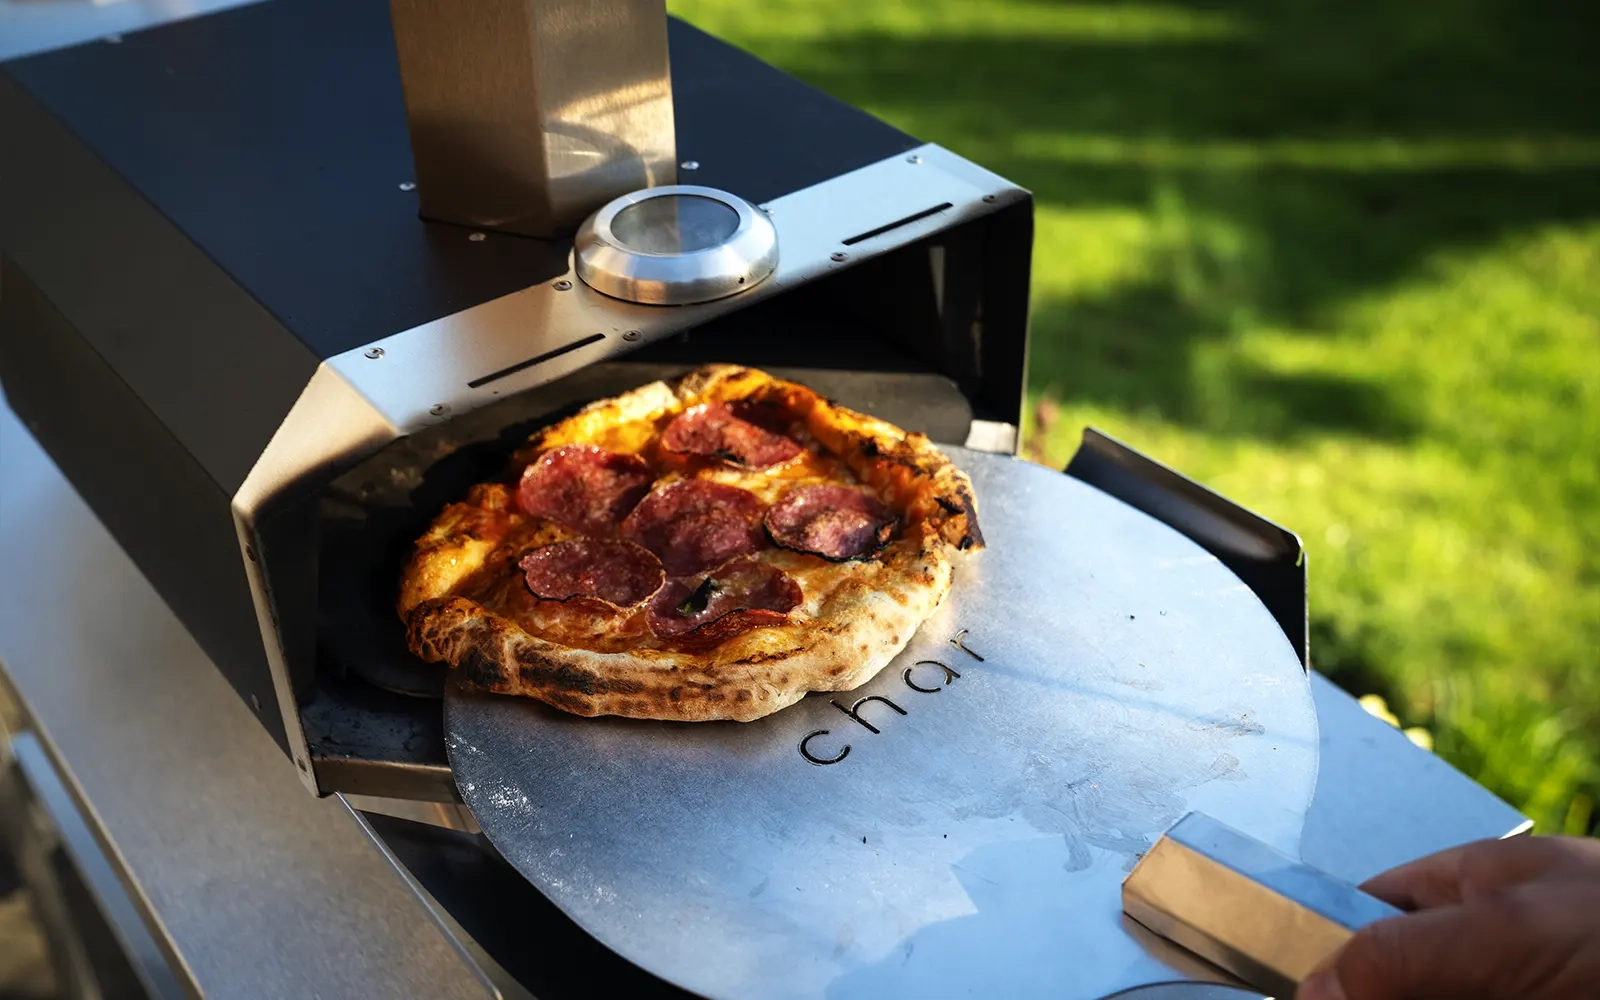 Close-up of a cooked pizza being taken out of a pizza oven on a pizza peel in a garden